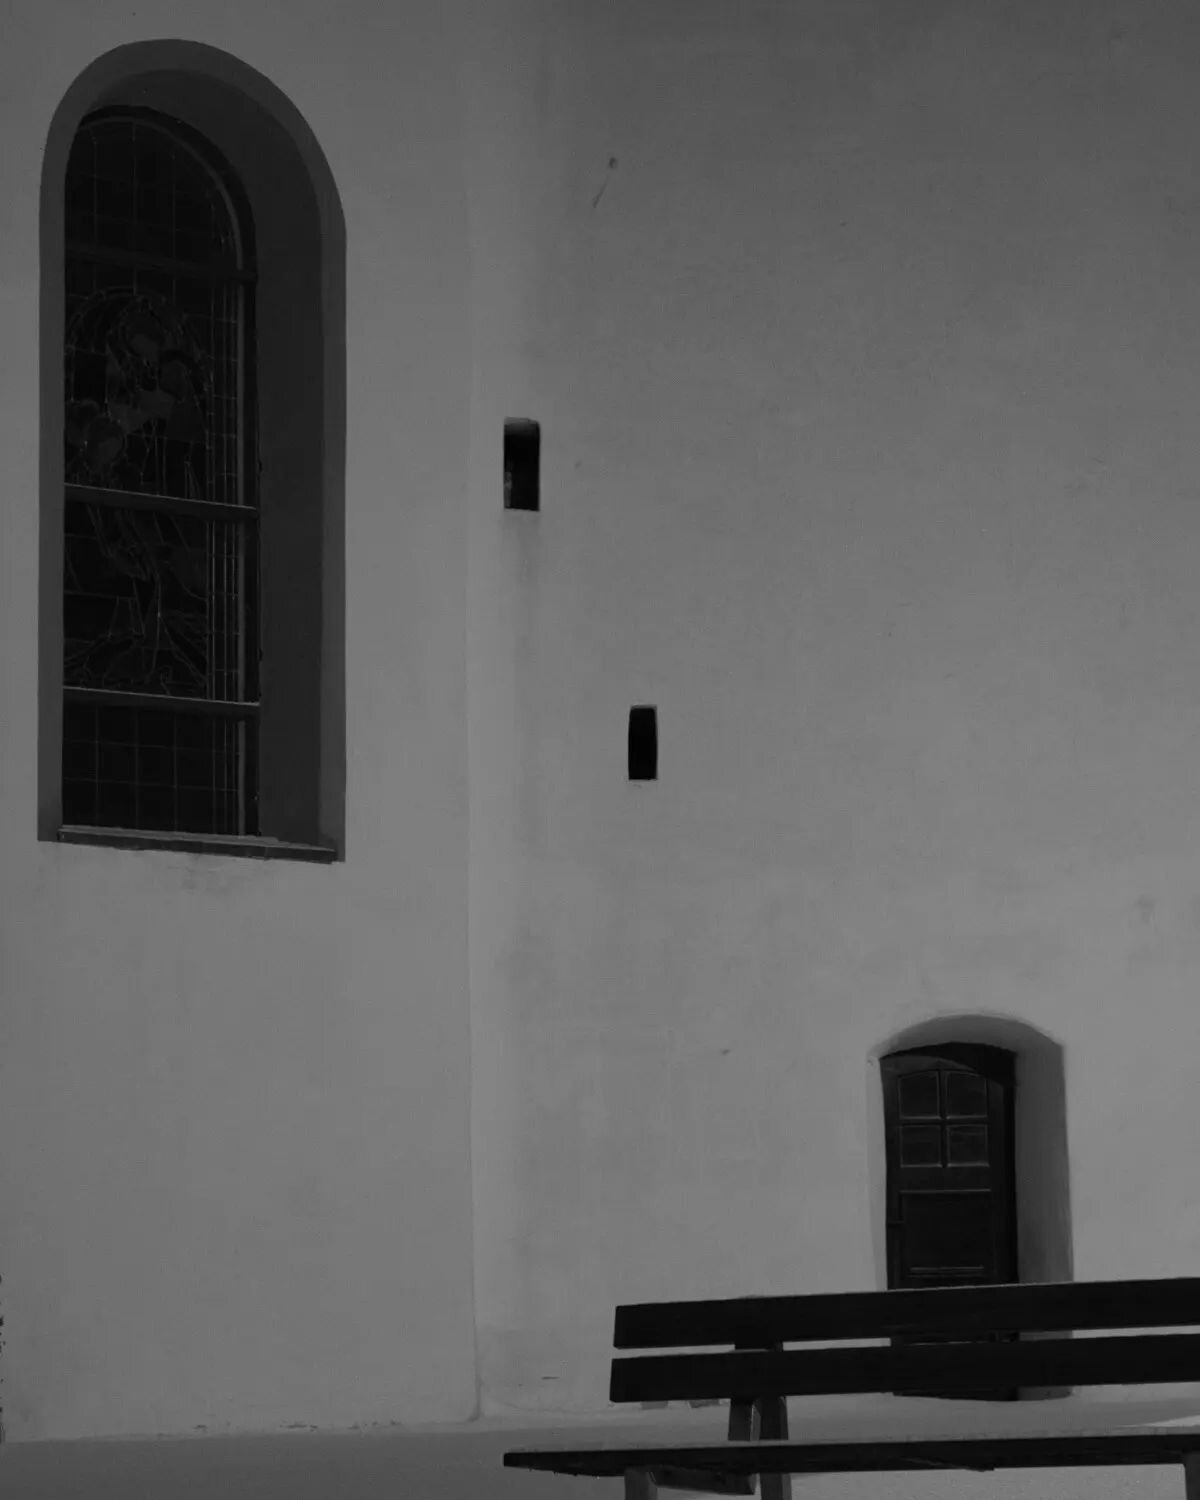 Doors

Found this random composition in Pfronten/GER while walking with the dog. 

#45mmf18 #45mm #olympuszuiko #streetphotographer #streetphotographersmagazine #streetphotography #streetphotographyinternational #blackandwhite #church #lensculturestr